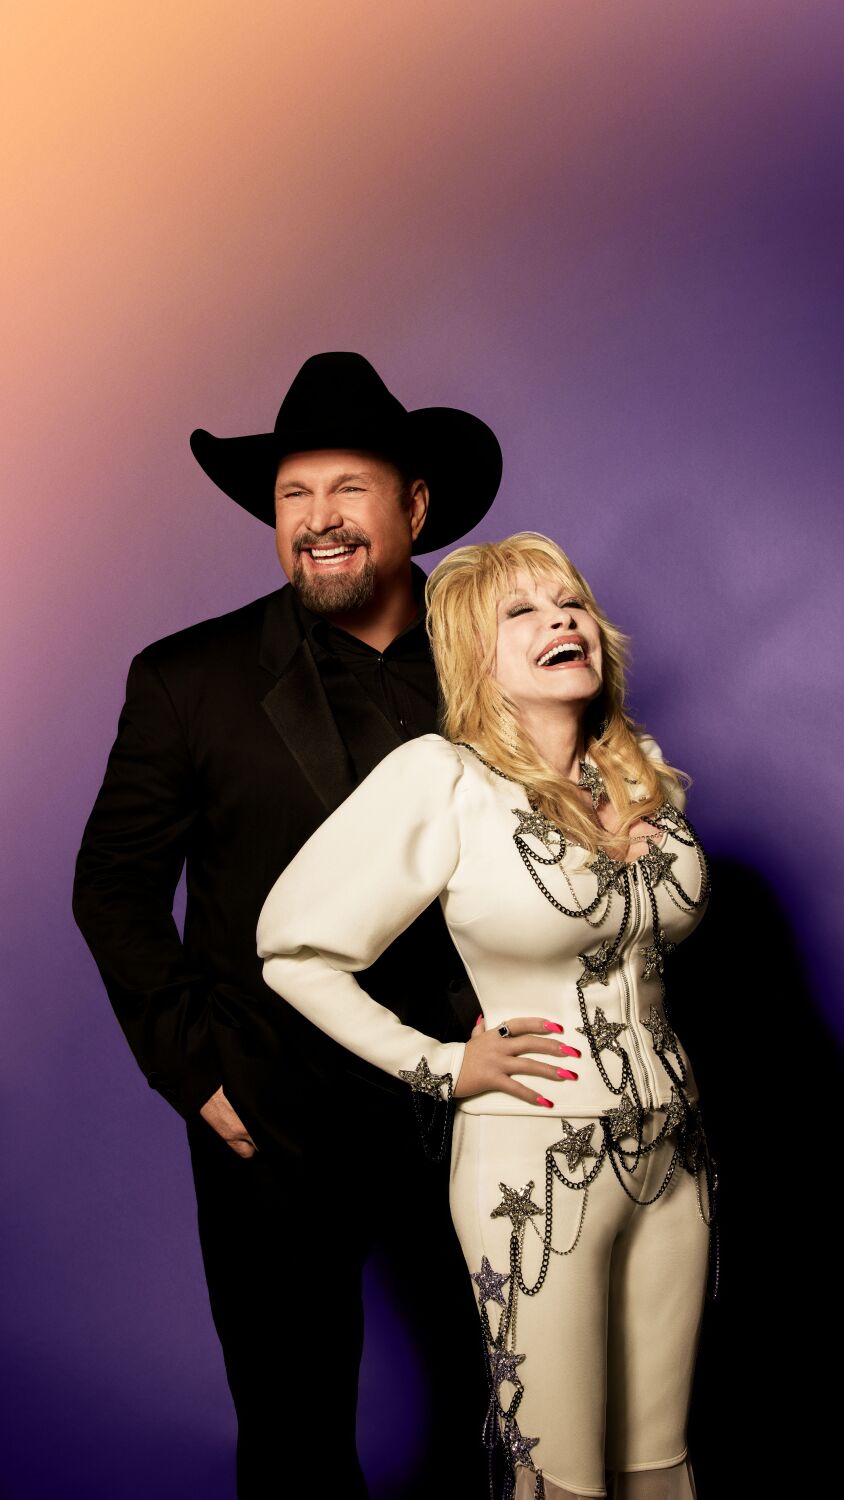 ACM Awards hosts Dolly Parton and Garth Brooks: 'We're gonna do it our way'